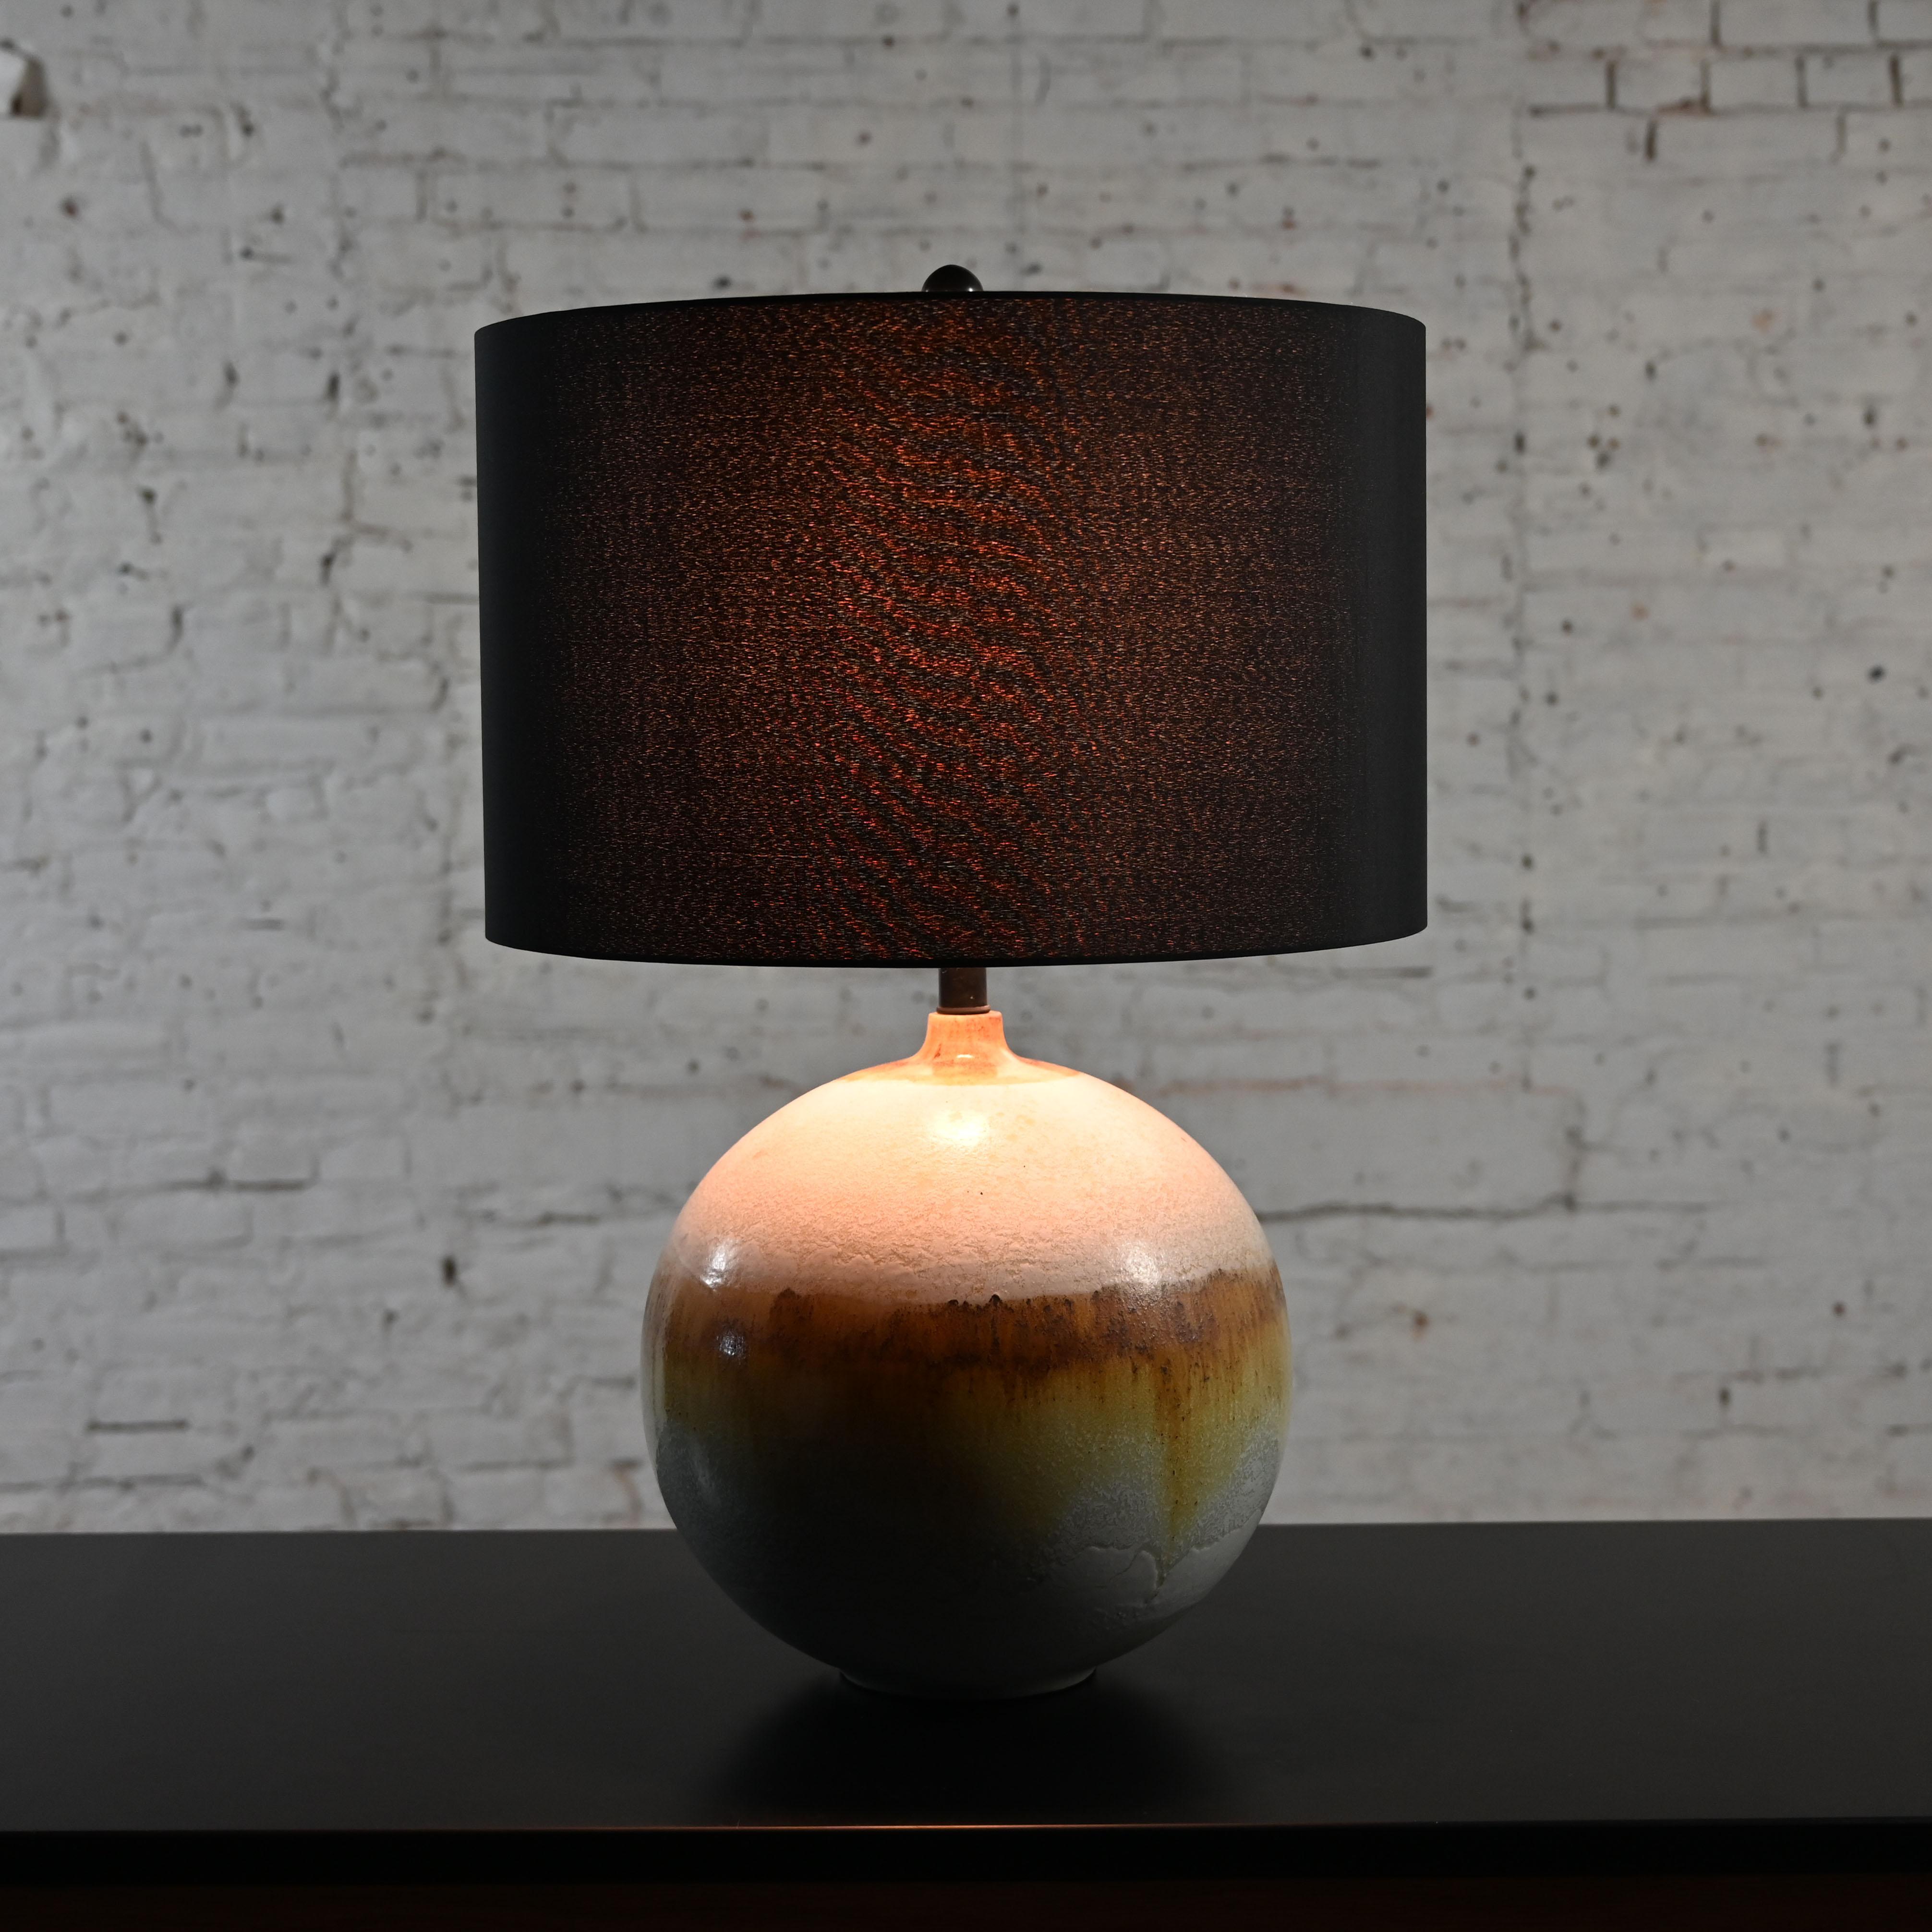 Mid-20th Century MCM Drip Glaze Ceramic Ball Lamp with New Black Shade For Sale 3